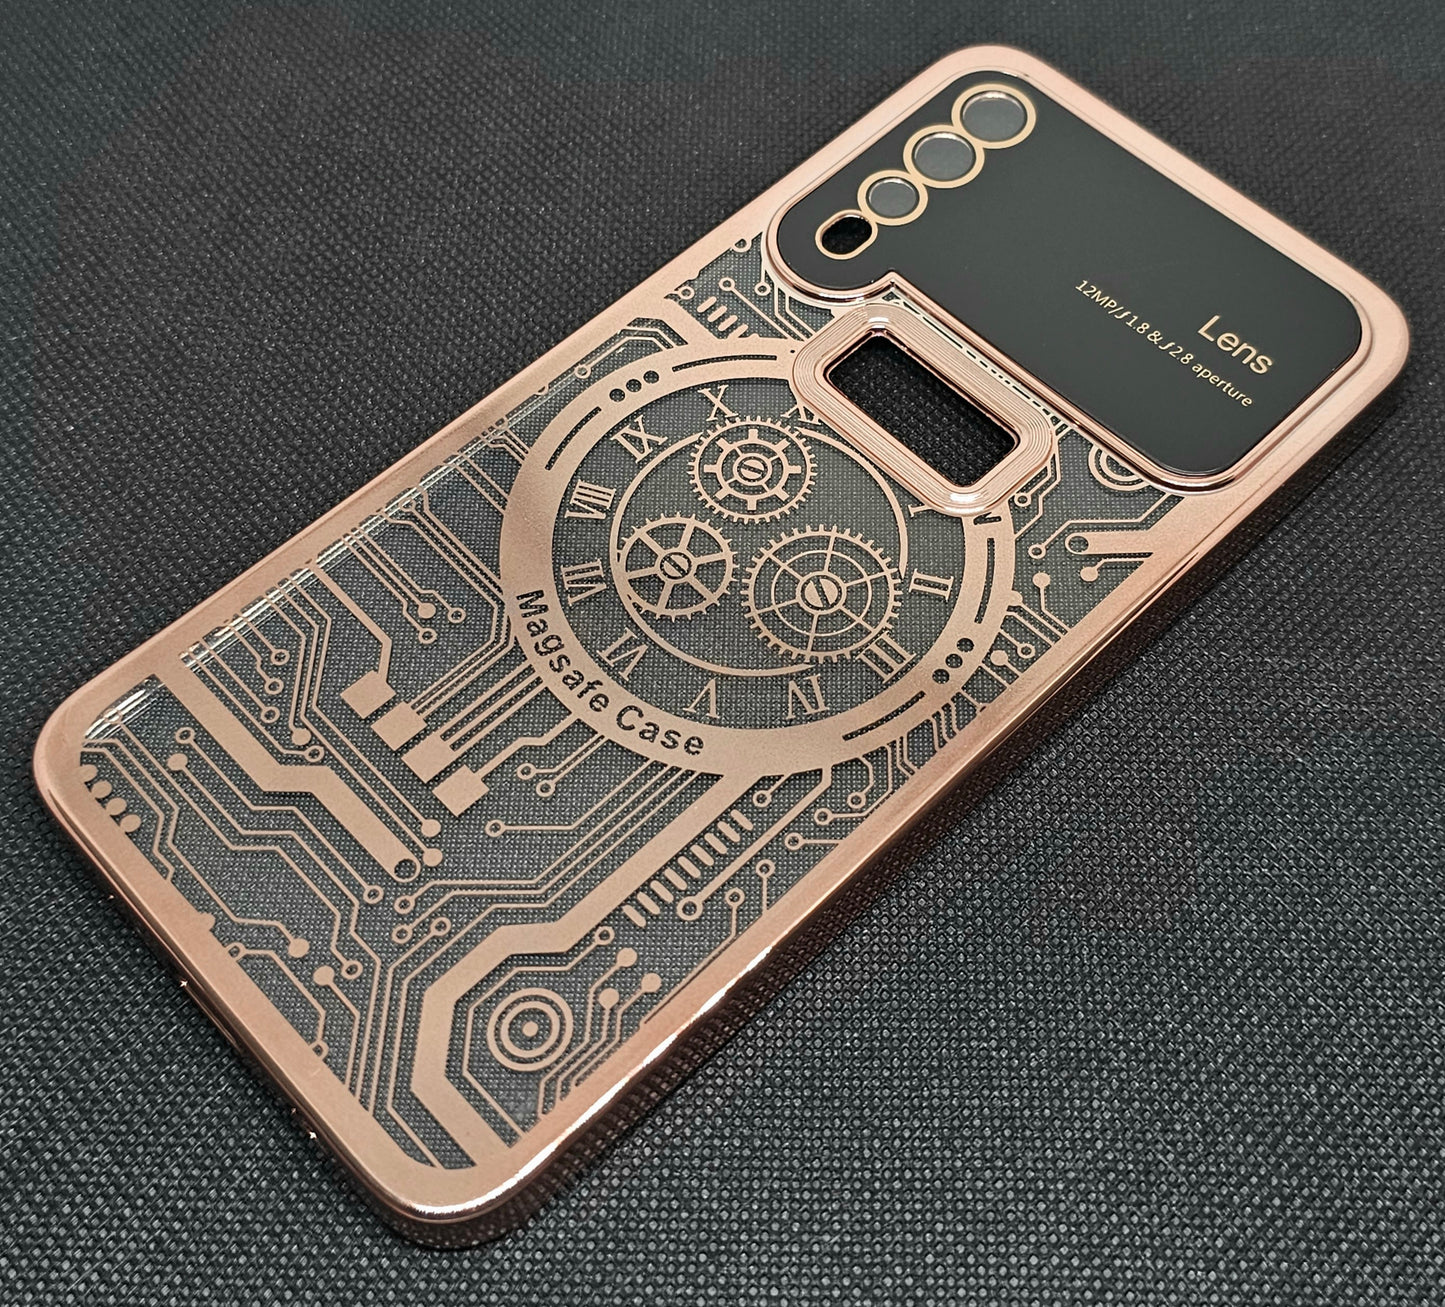 Samsung A50/A50s/A30s Back Cover with CD Watch Machine Design